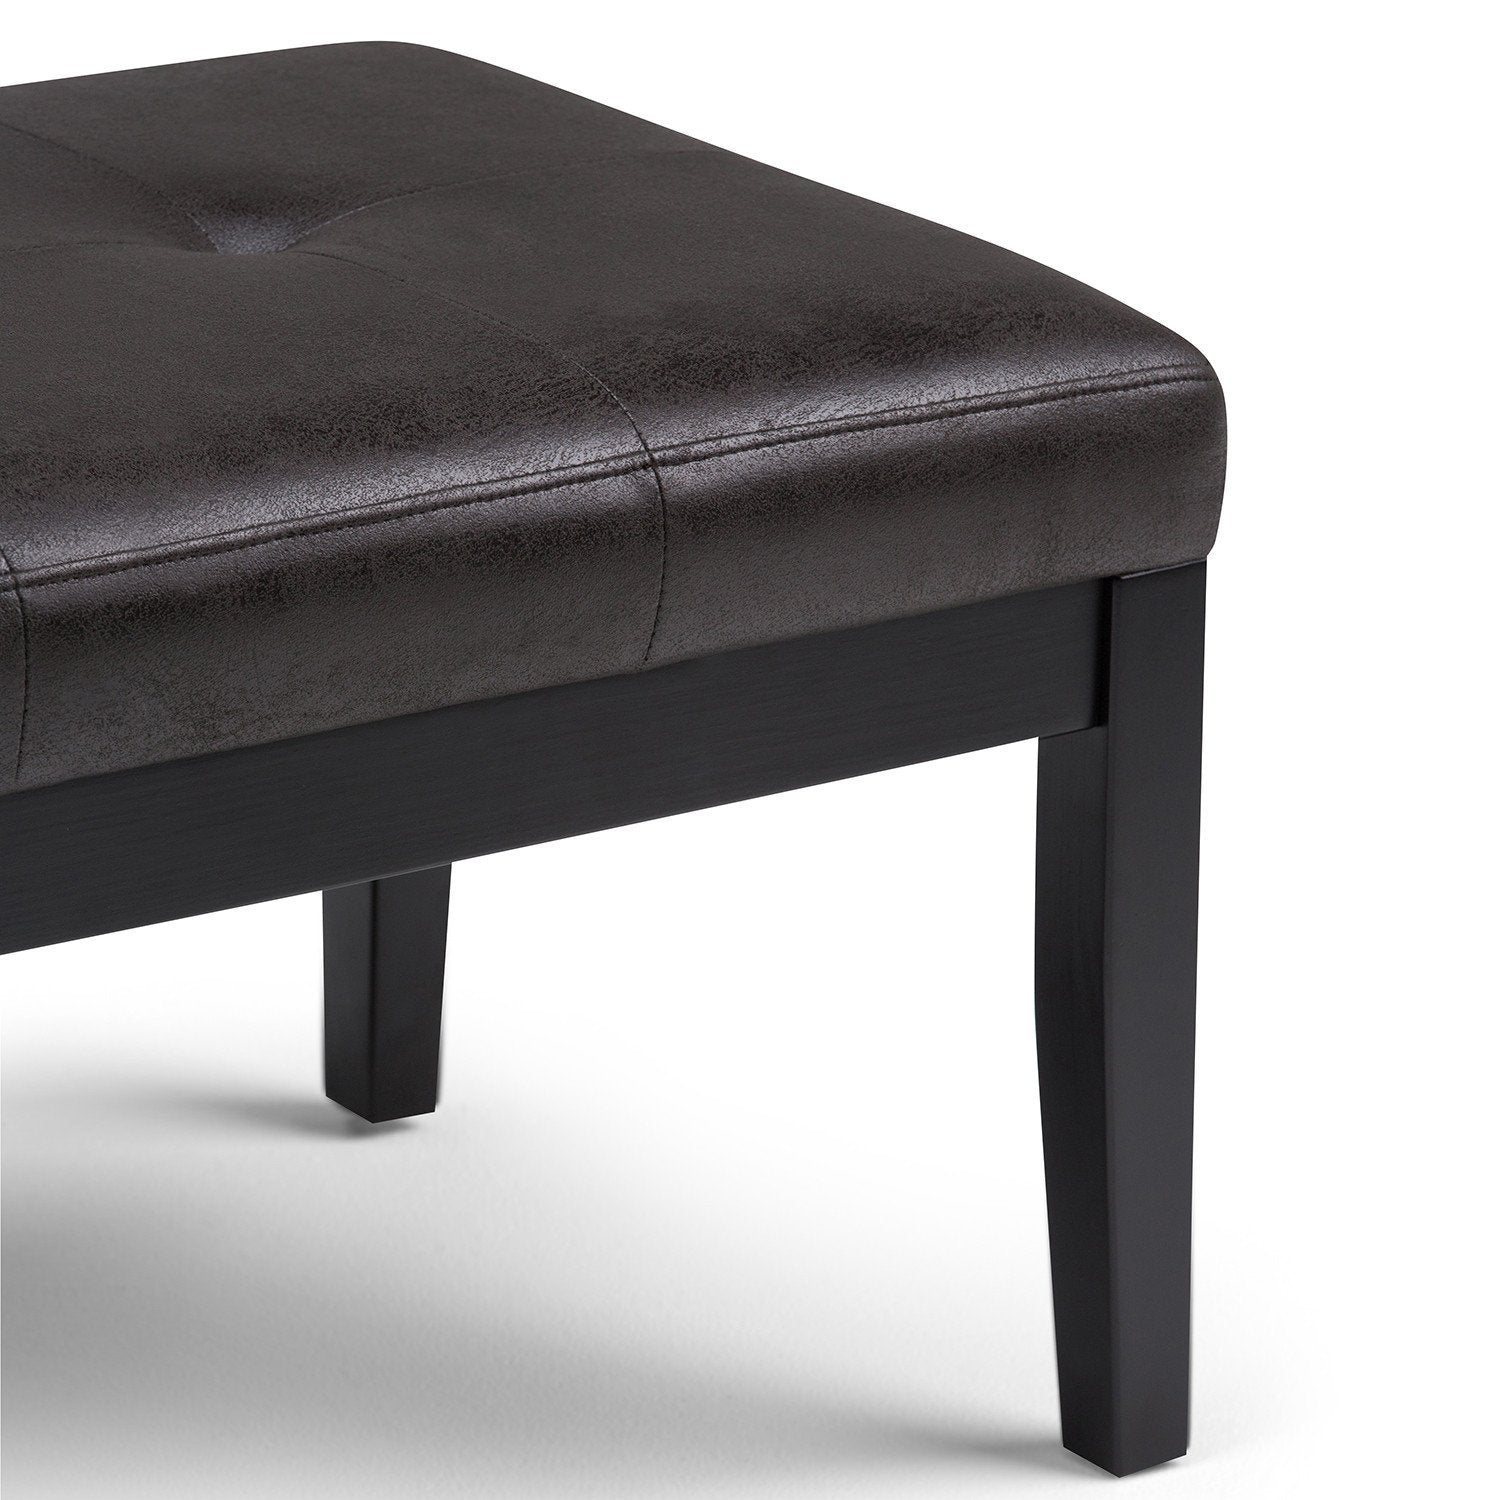 Distressed Black Distressed Vegan Leather | Lacey Tufted Ottoman Bench